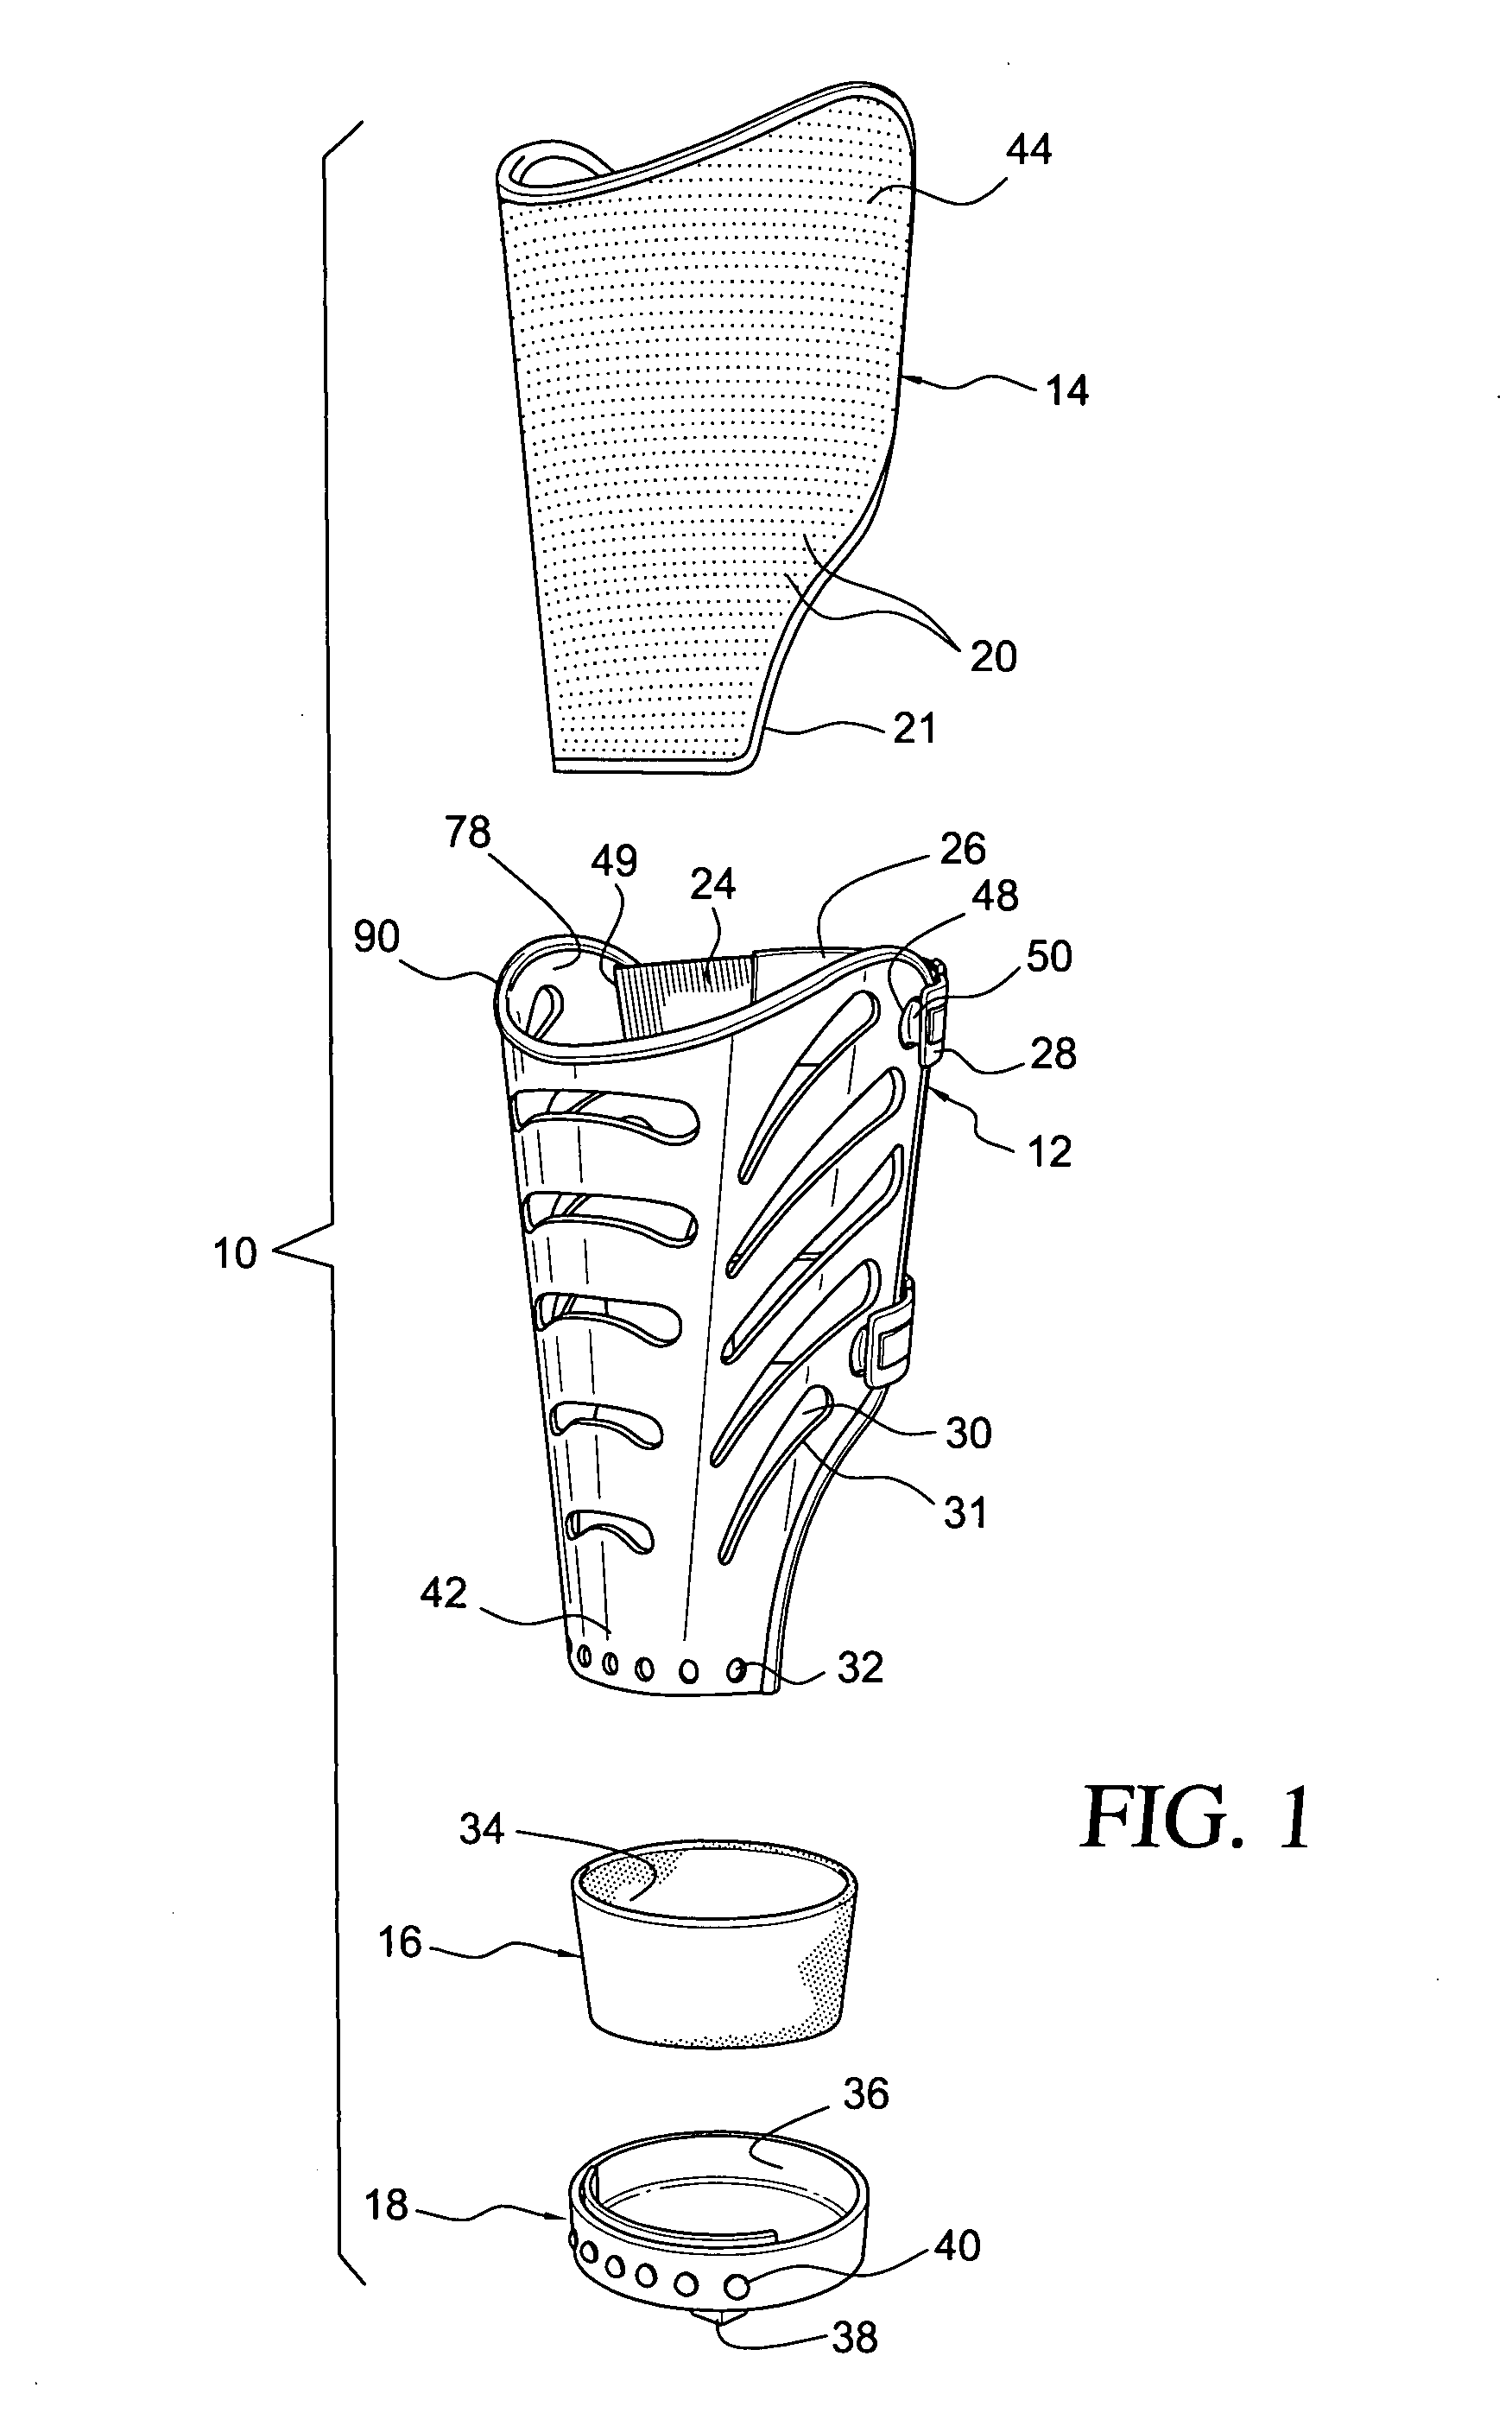 Ventilated prosthesis system